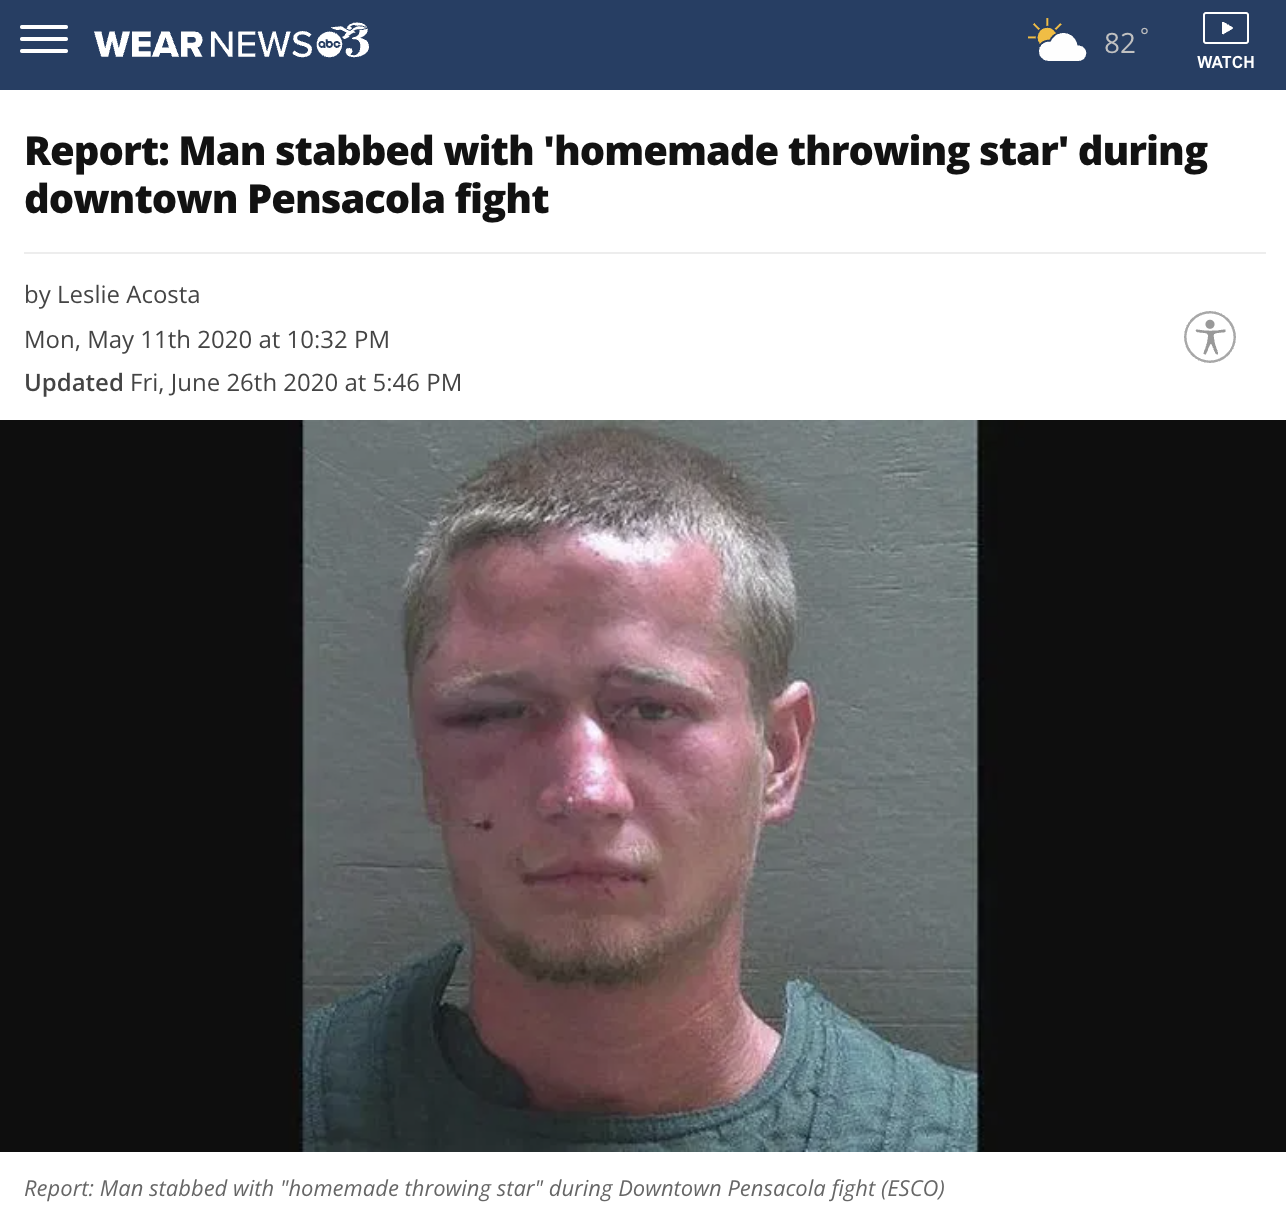 screenshot - Wear News 3 Watch Report Man stabbed with 'homemade throwing star' during downtown Pensacola fight by Leslie Acosta Mon, May 11th 2020 at Updated Fri, June 26th 2020 at Report Man stabbed with "homemade throwing star" during Downtown Pensacol